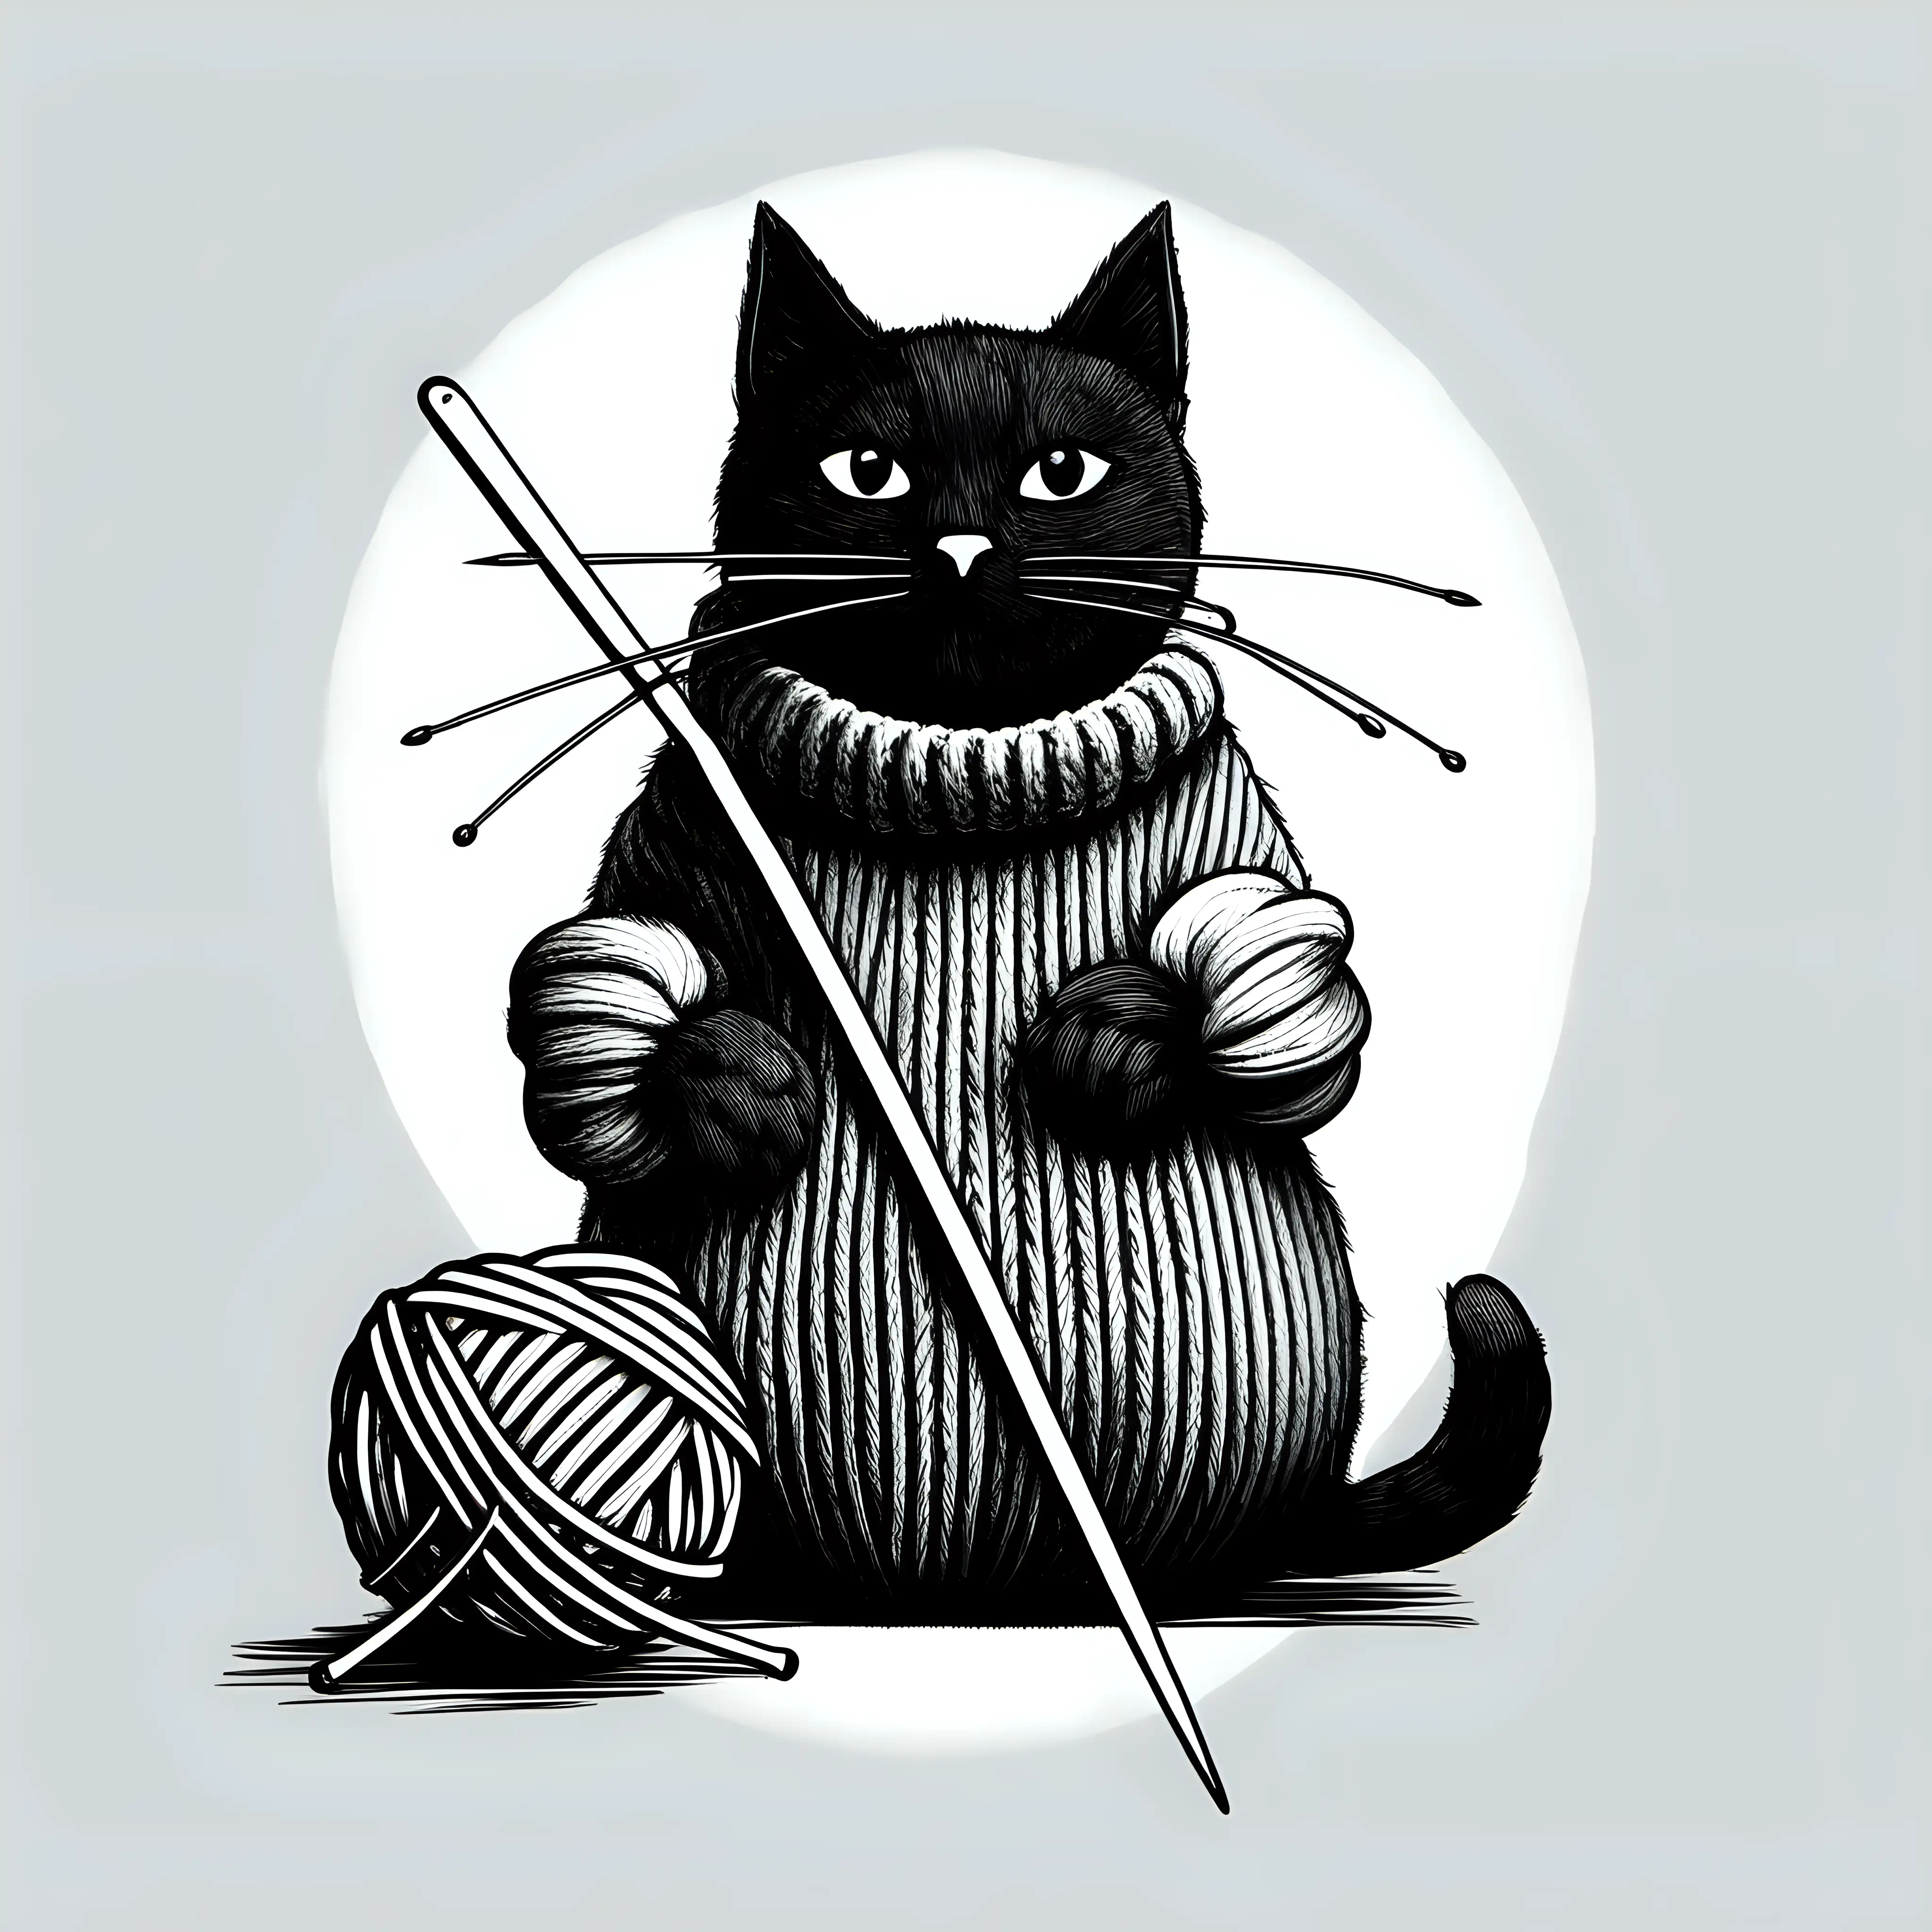 simplistic black and white sketch of a cat with knitting needles